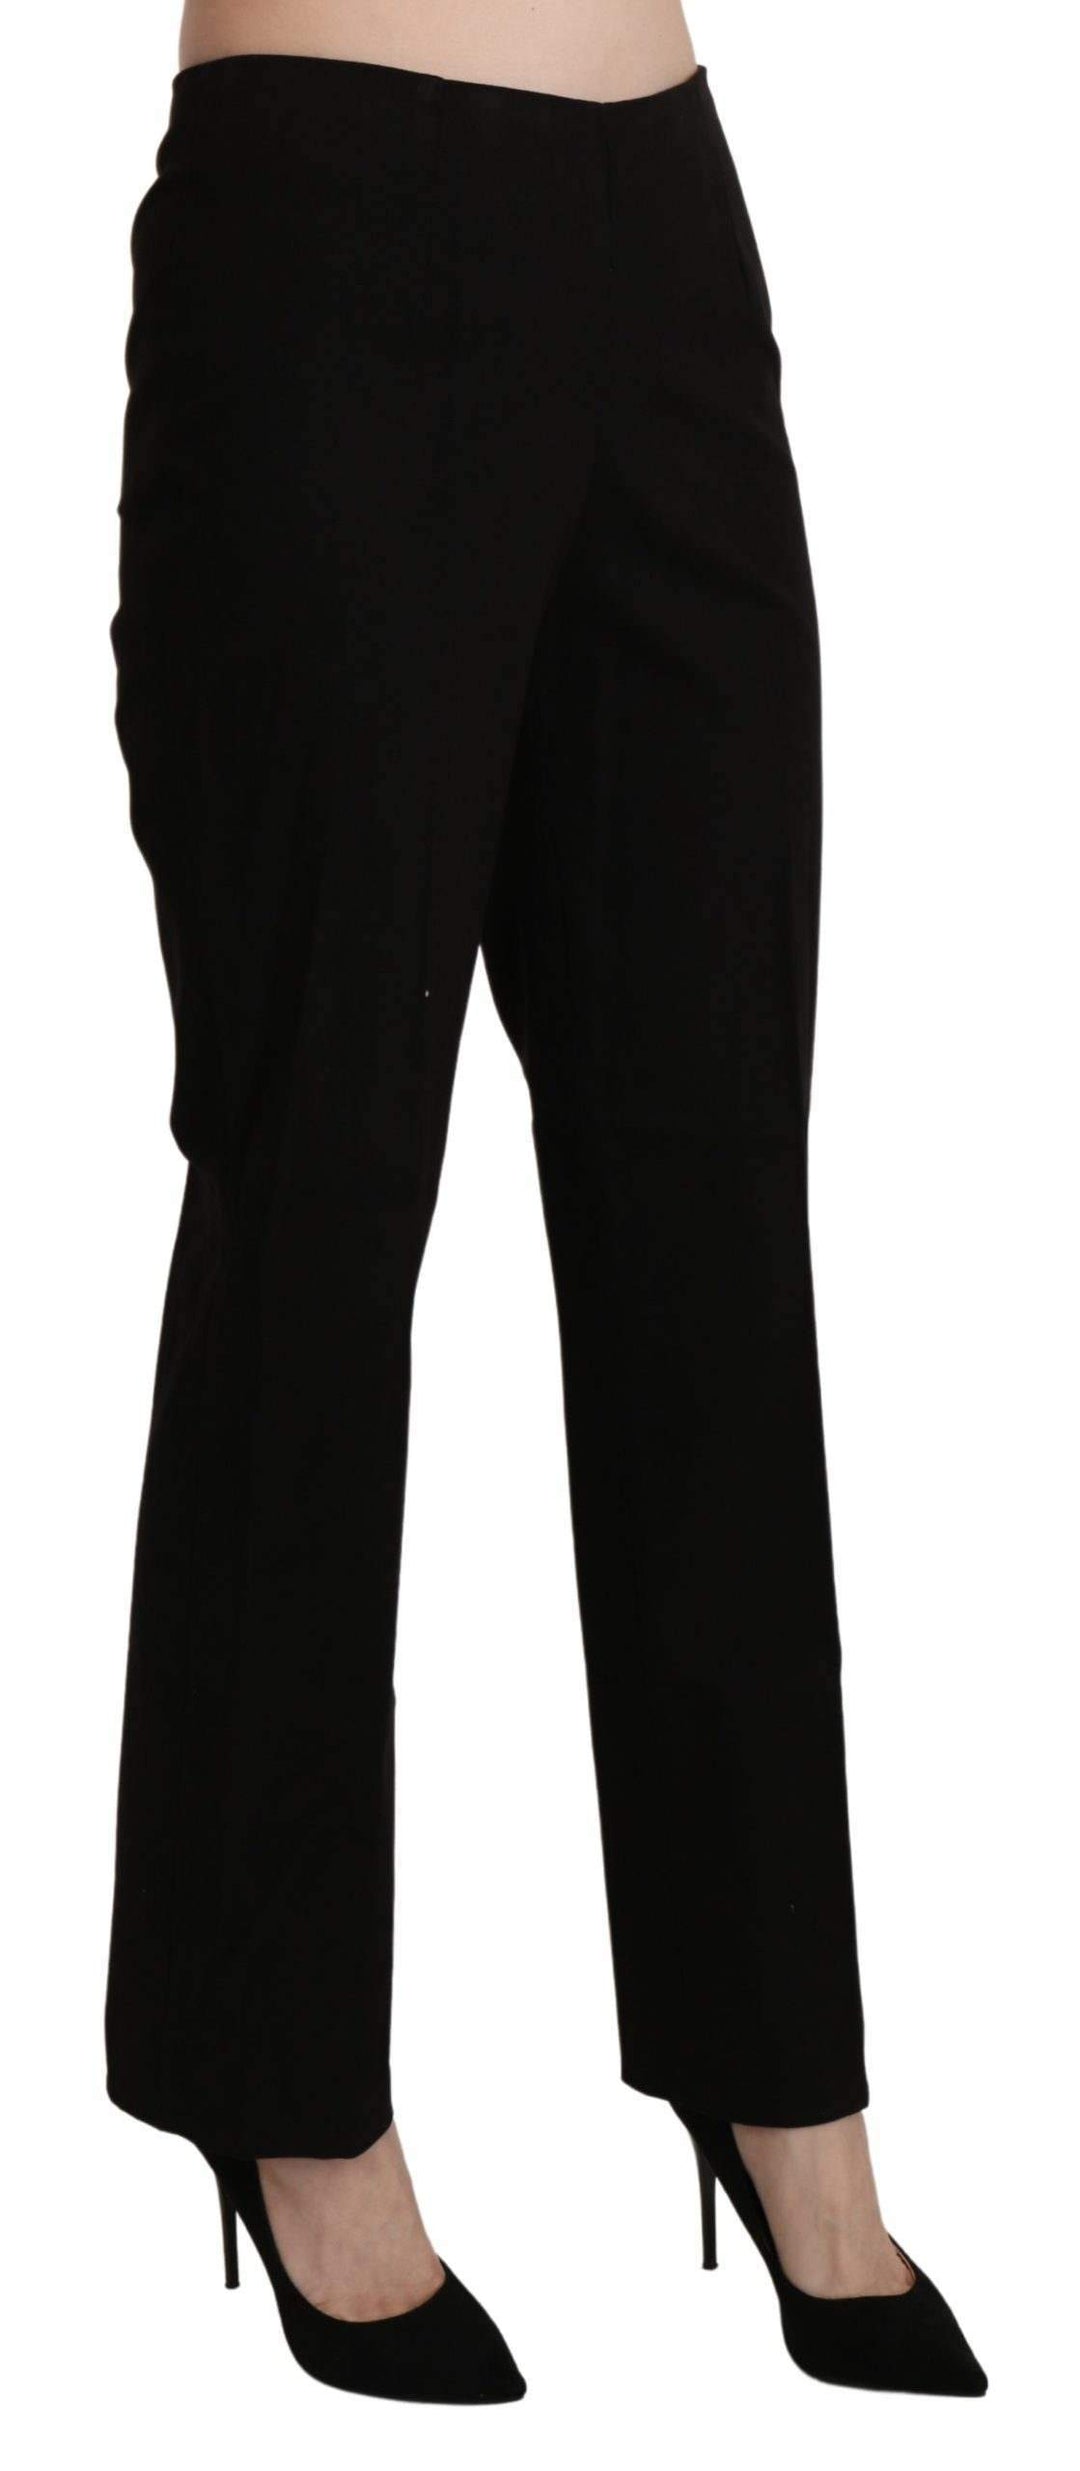 BENCIVENGA  High Waist Straight Dress Trouser Pant #women, BENCIVENGA, Black, feed-agegroup-adult, feed-color-black, feed-gender-female, feed-size-IT44|L, feed-size-IT46|XL, feed-size-IT48|XXL, feed-size-IT50|3XL, Gender_Women, IT42|M, IT44|L, IT46|XL, IT48|XXL, IT50|3XL, Jeans & Pants - Women - Clothing, Women - New Arrivals at SEYMAYKA